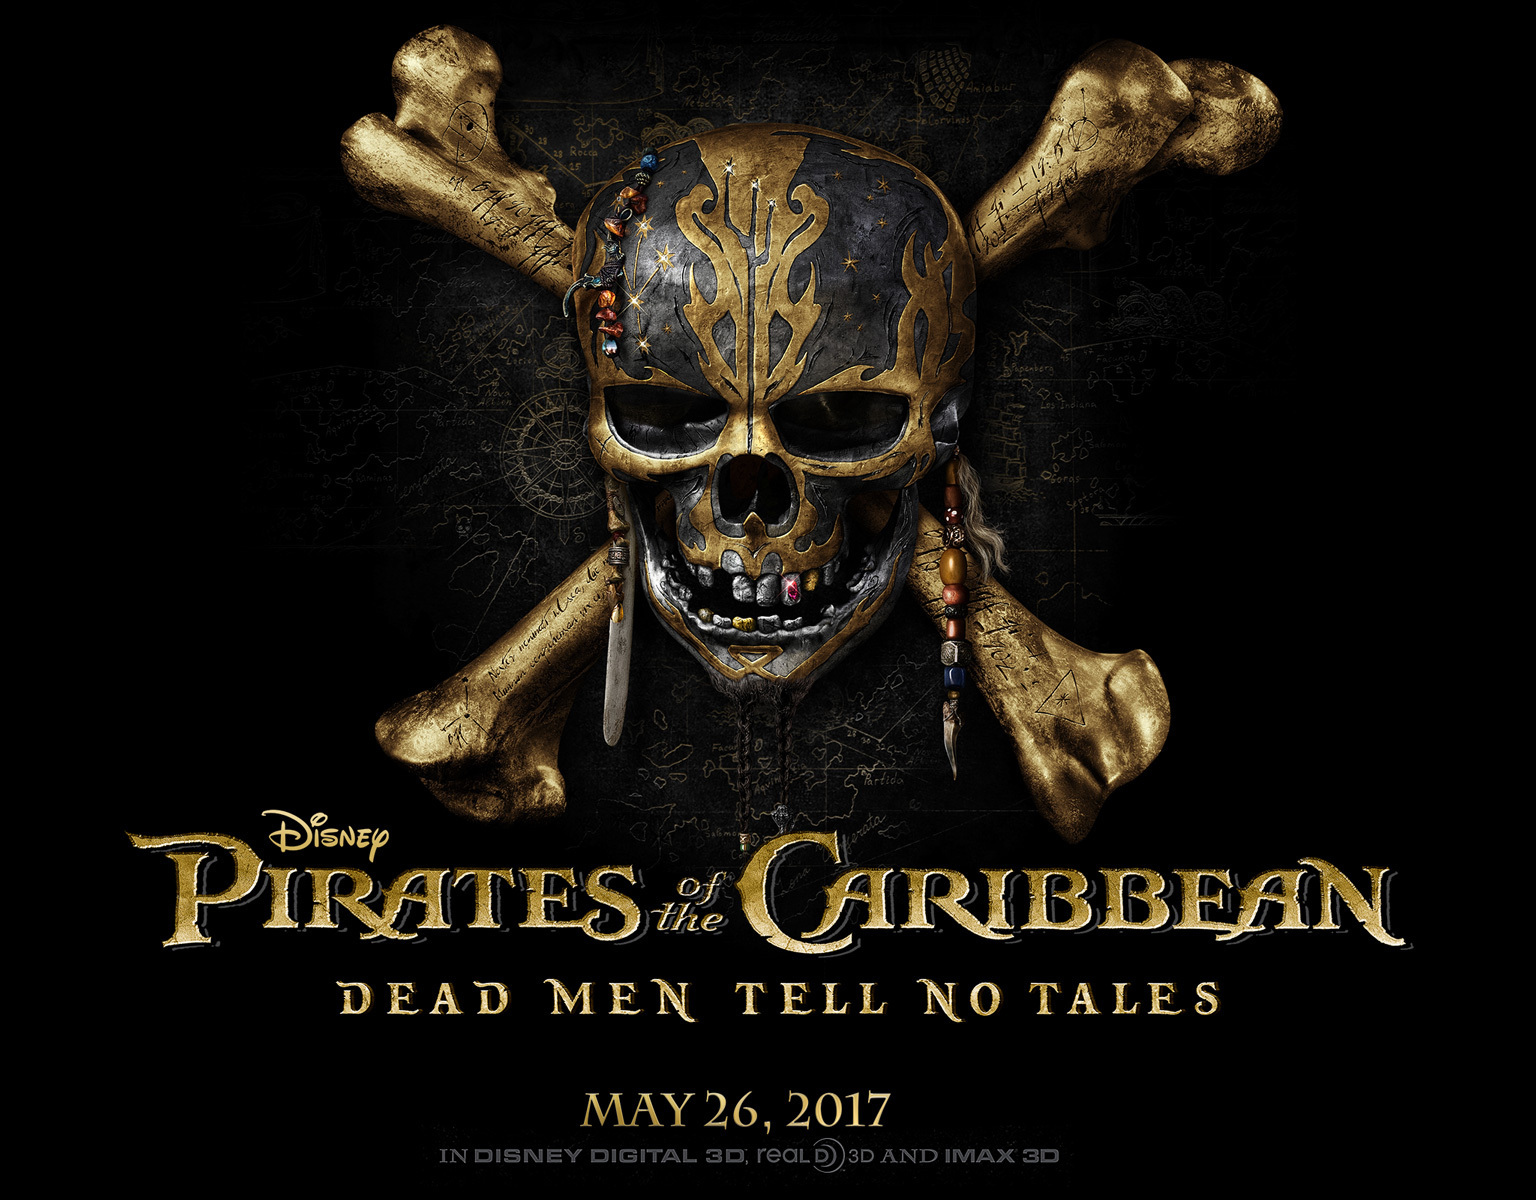 Disney Release New Pirates Of The Caribbean Trailer